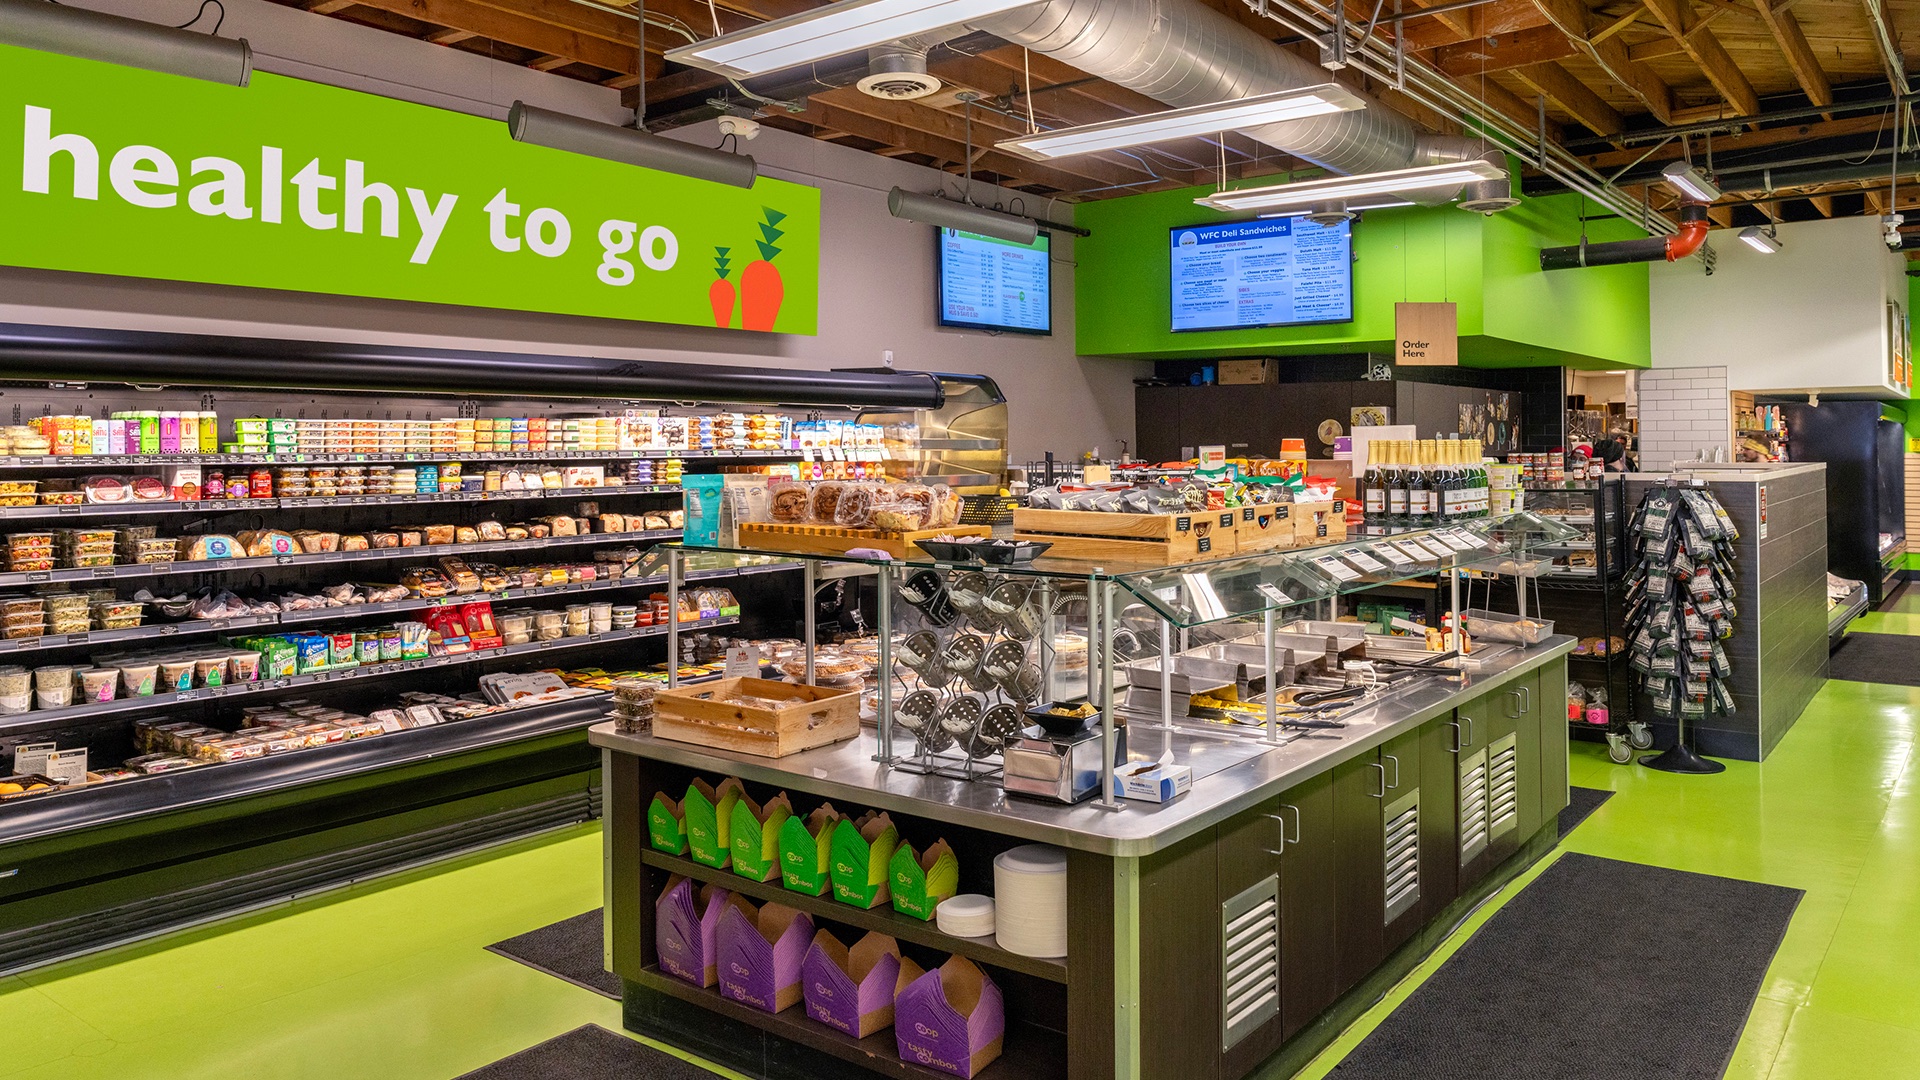 A modern grocery store section with a salad bar, shelves stocked with various food items, and a bright green sign that reads "healthy to go." The area is well-lit and features a clean design with visible food options and digital menu screens.